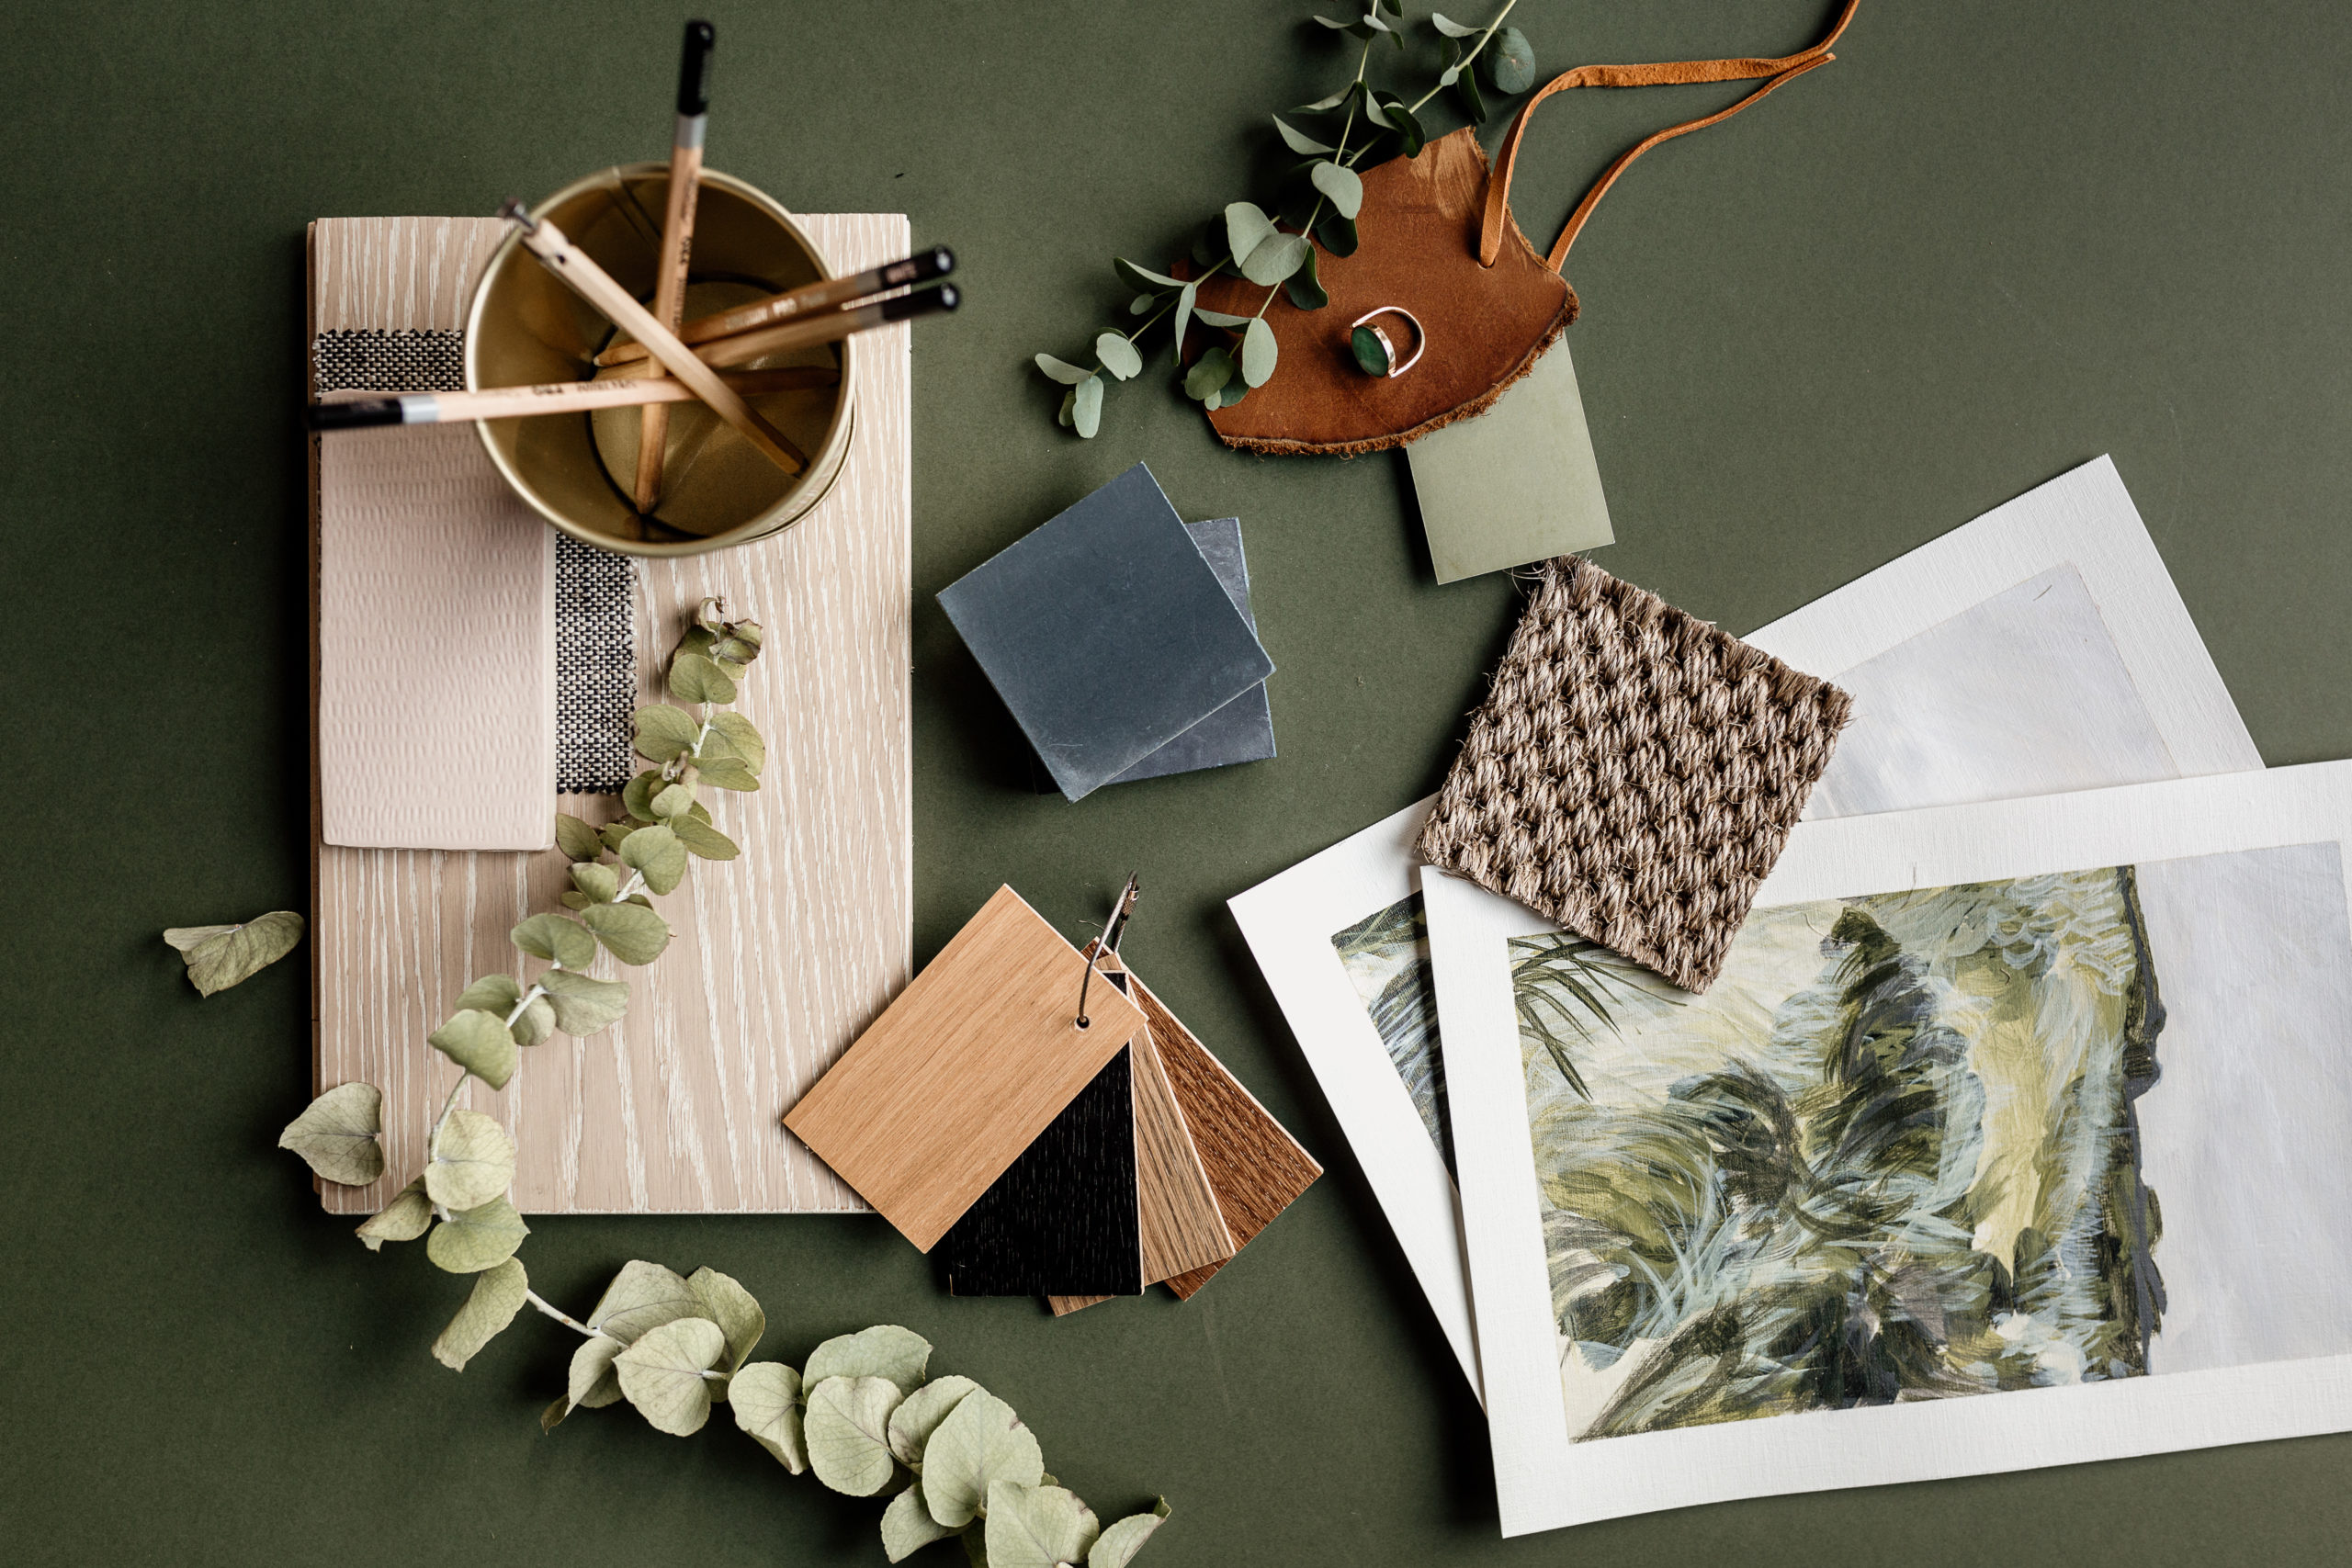 Moodboard featuring a palette of materials used in biophillic design